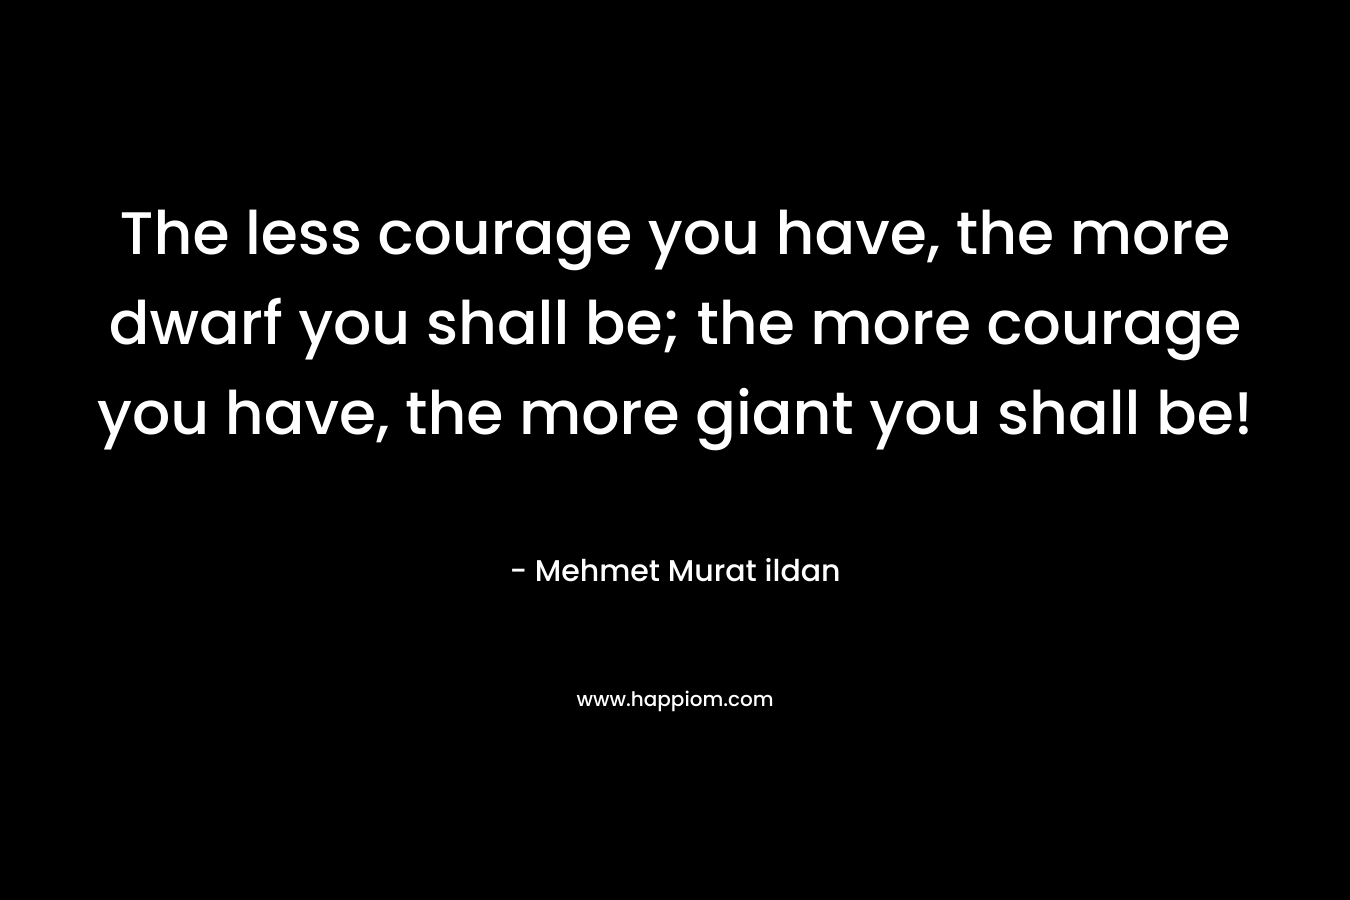 The less courage you have, the more dwarf you shall be; the more courage you have, the more giant you shall be!